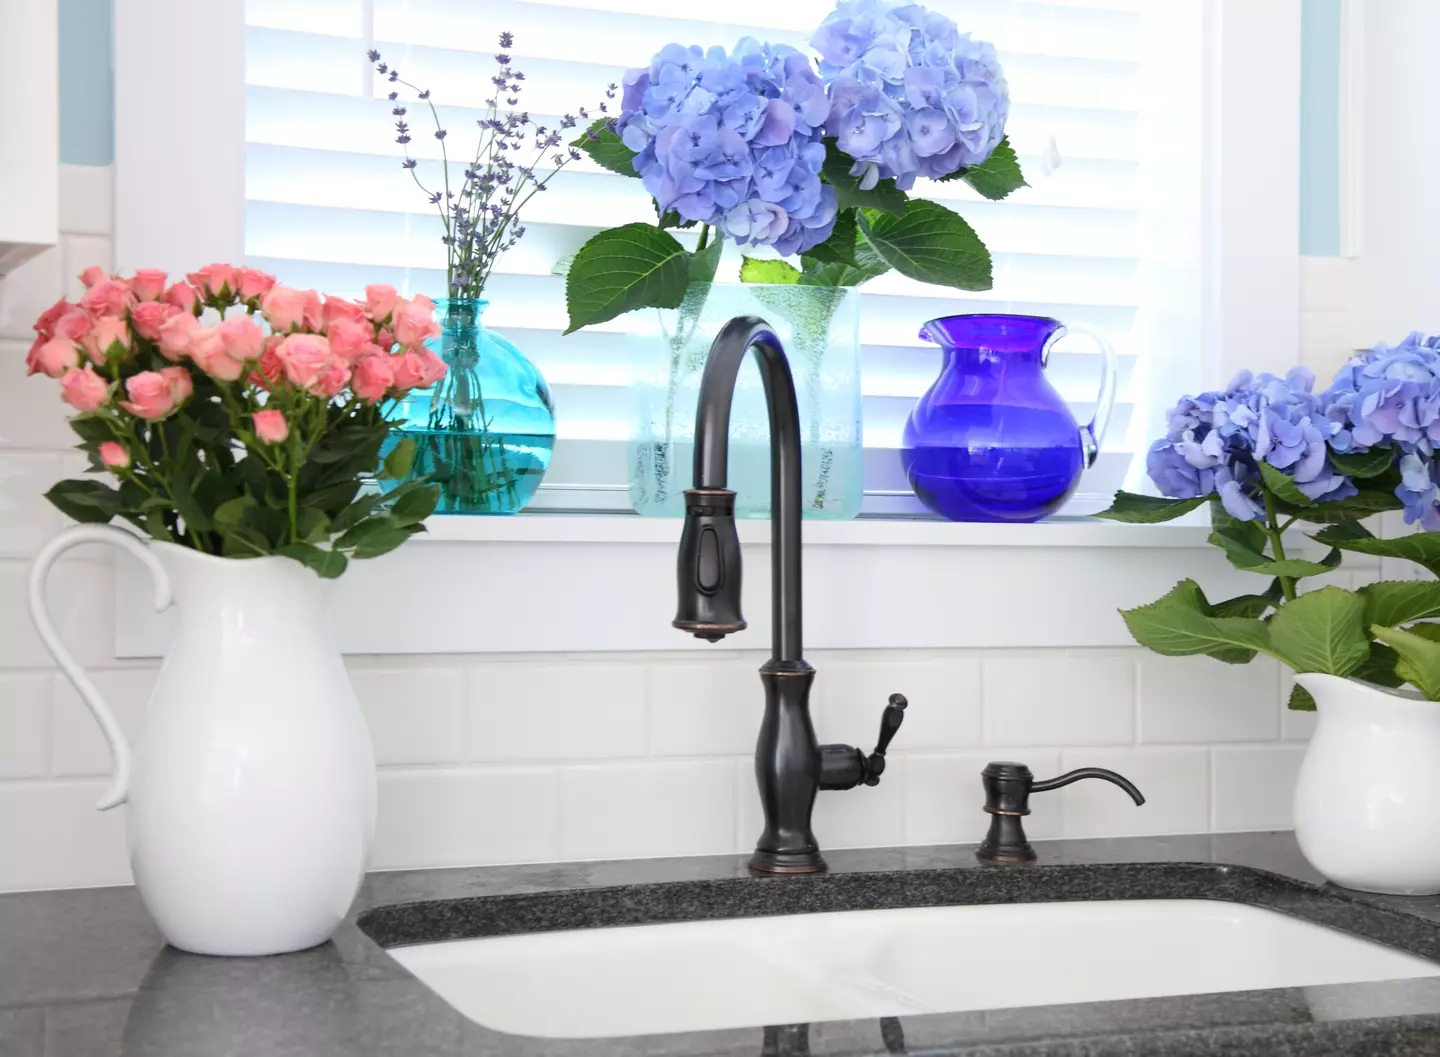 Have you ever wondered why kitchen sinks always seem to be underneath a window? (